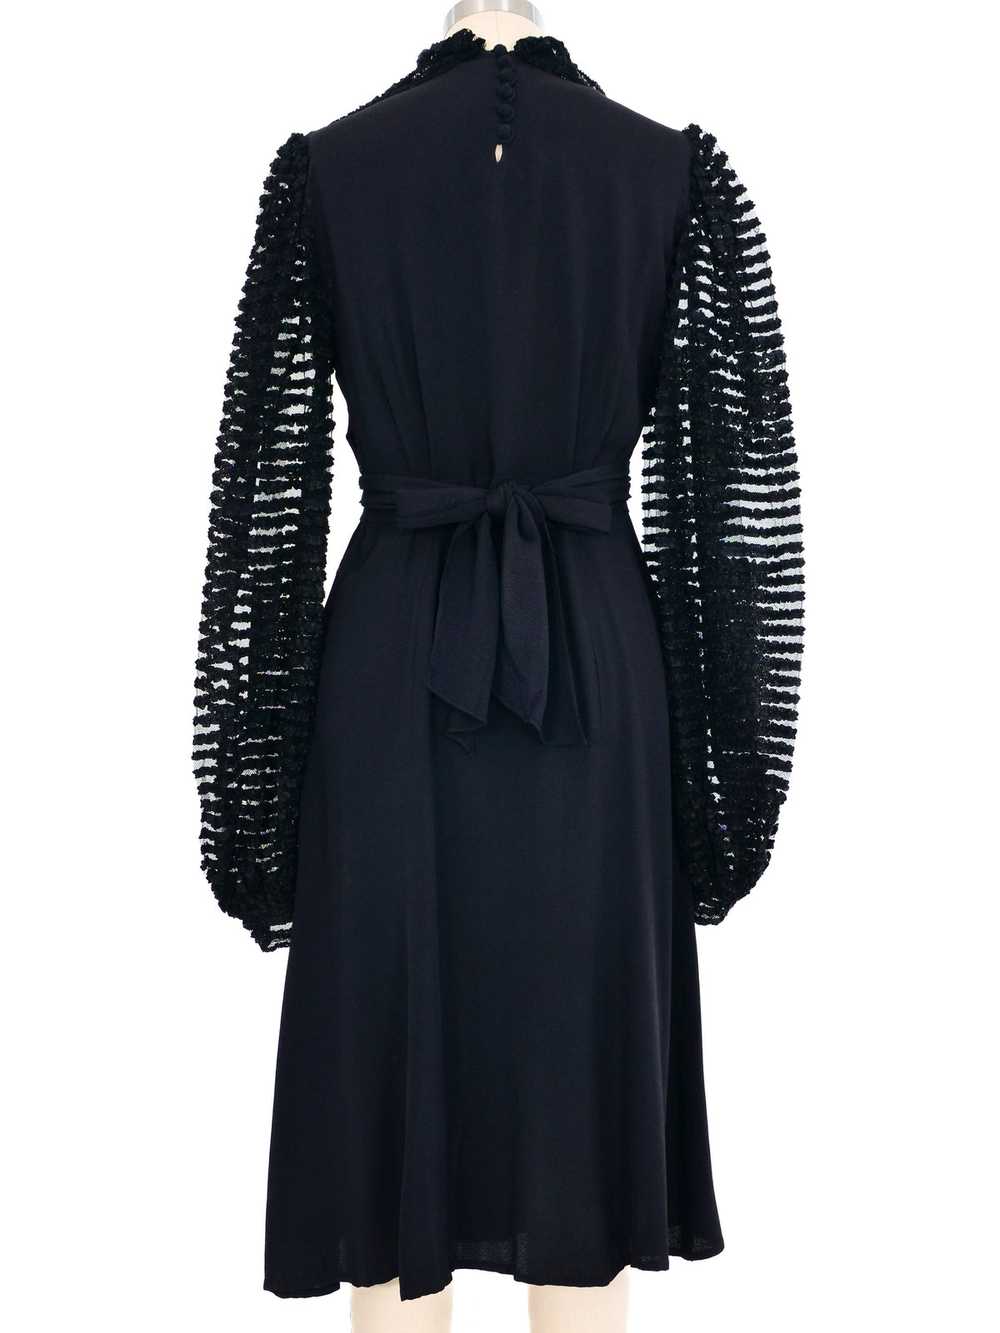 1940s Balloon Sleeve Lace Accent Crepe Midi Dress - image 8